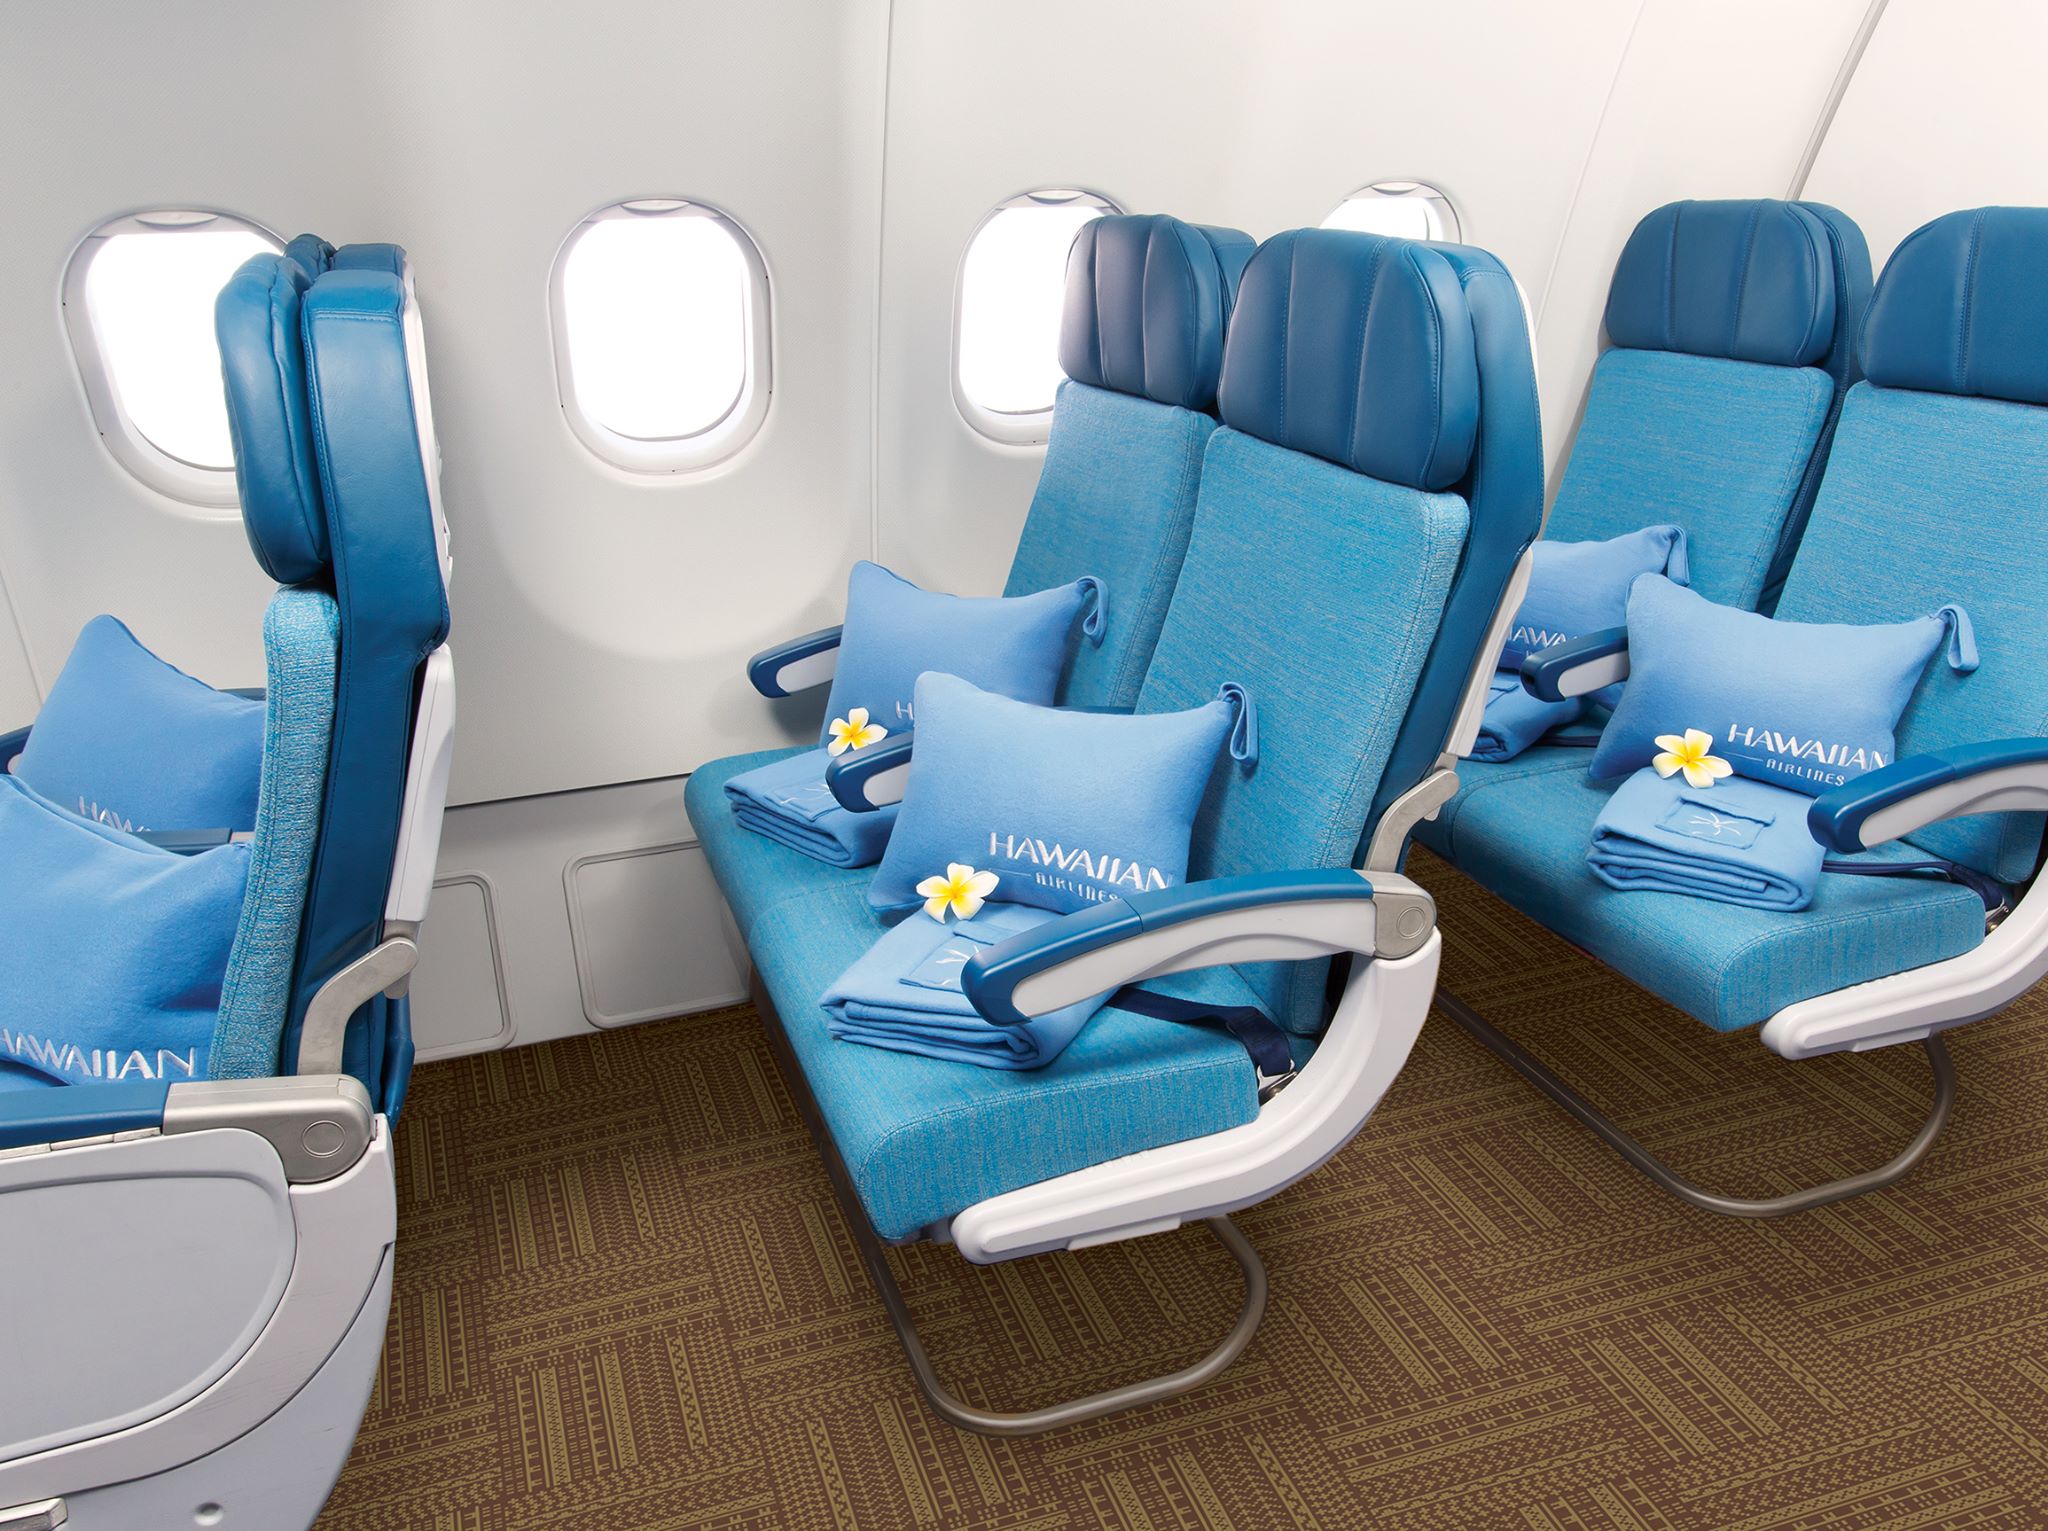 Hawaiian Airlines will be offering a new class of seats that offer more legroom and other amenities.